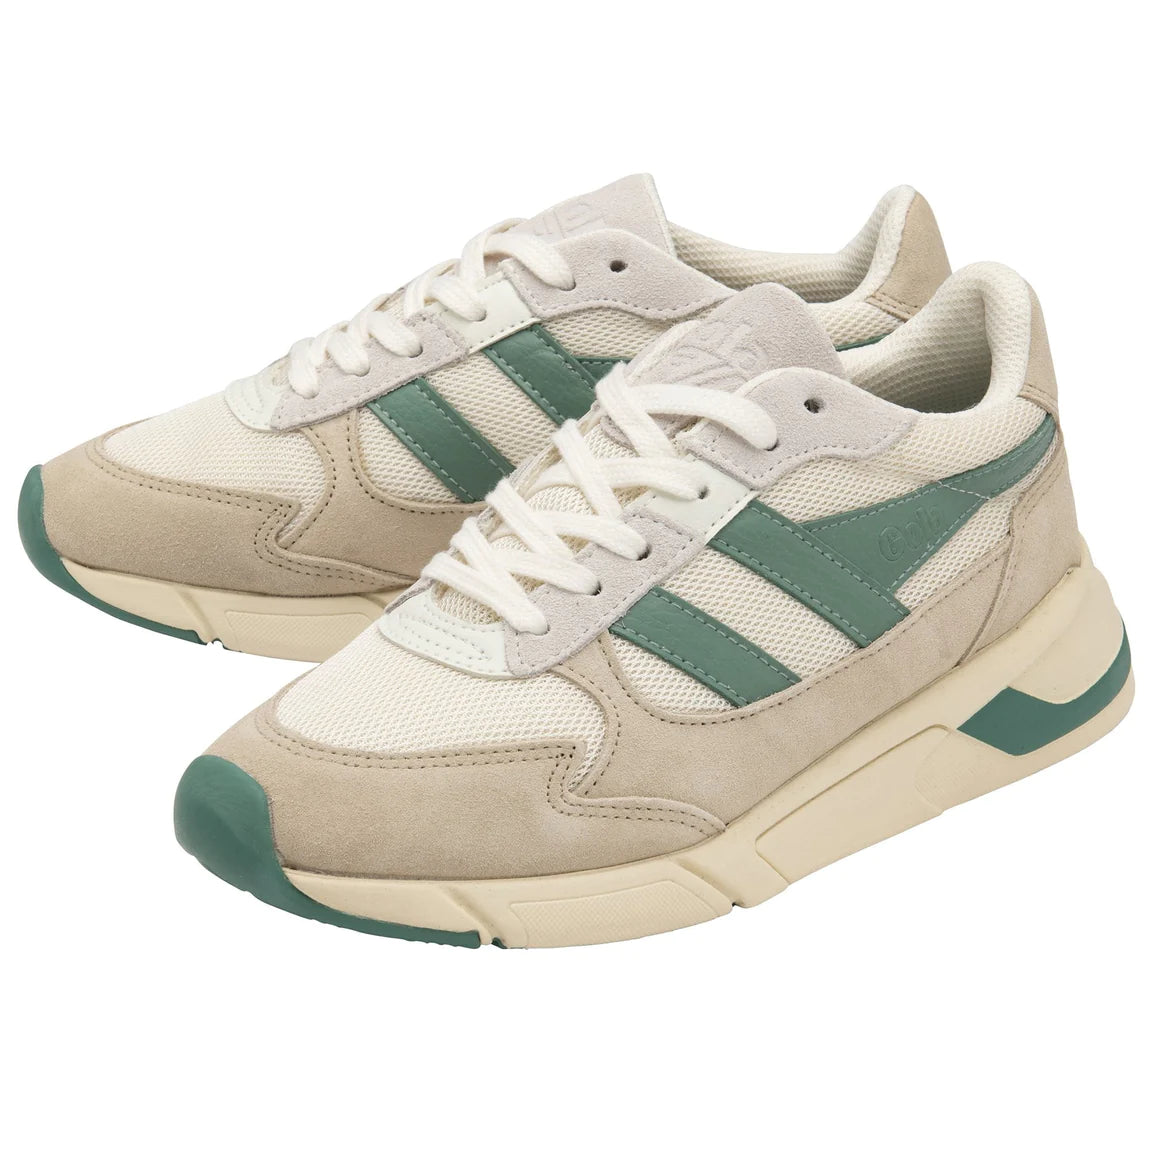 Gola Tempest Sneakers in White/Wheat/Green